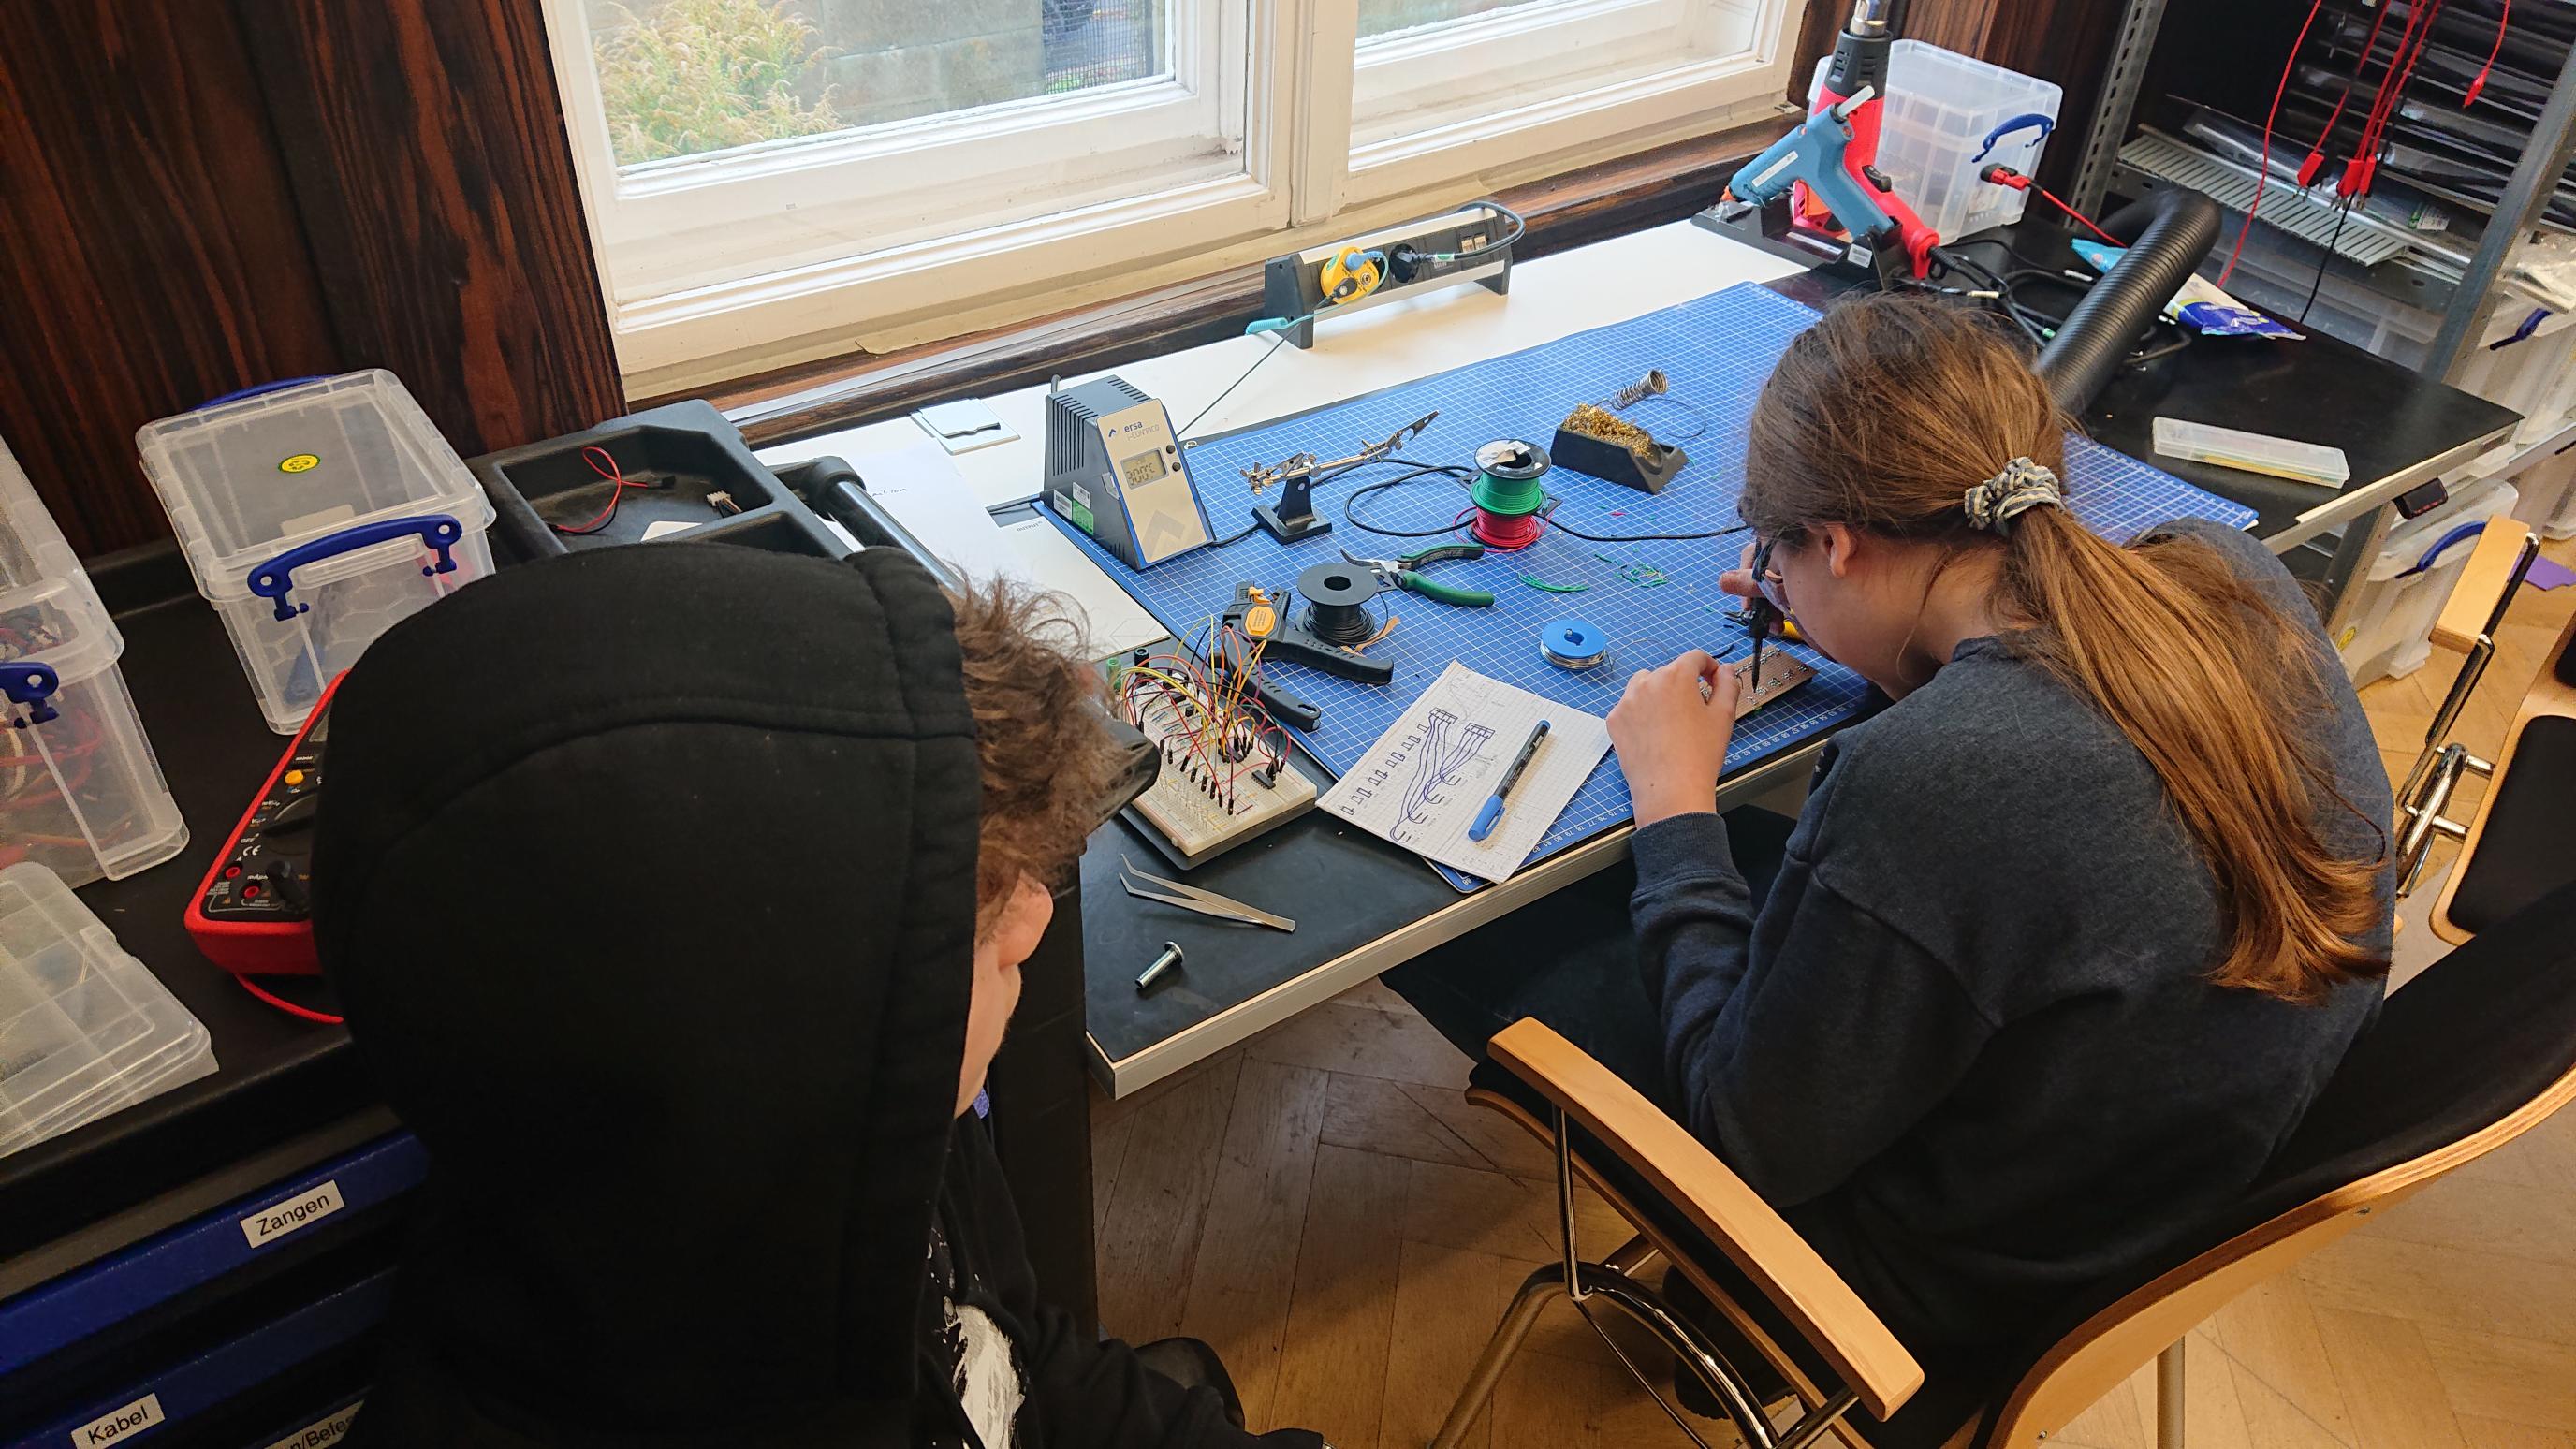 2 children sit at a table. one kid is soldering. the other one is watching.